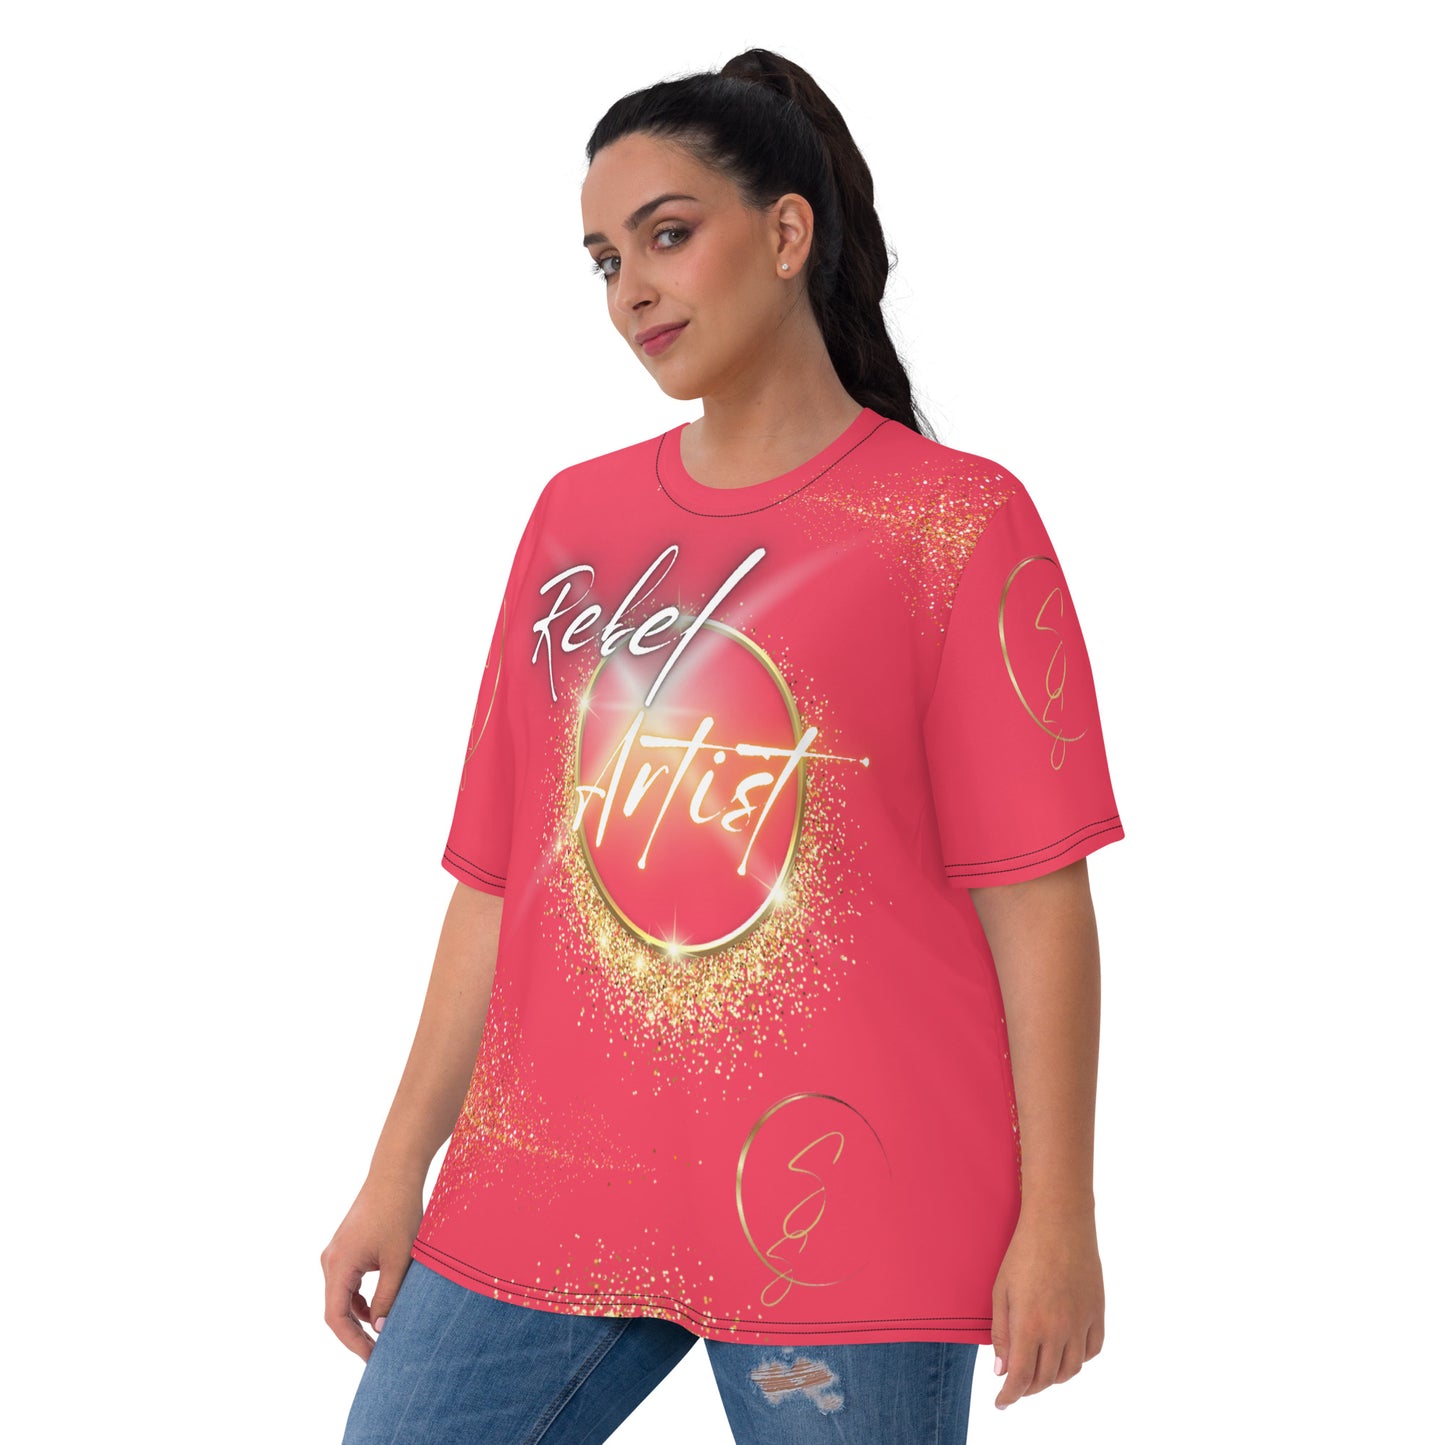 🎨 Unleash Your Rebel Spirit: Female Artist’s Radical Red T-Shirt - Plus Size! 🔥👩‍🎨 Don't miss out – Be a Rebel Artist! 🔥🎨